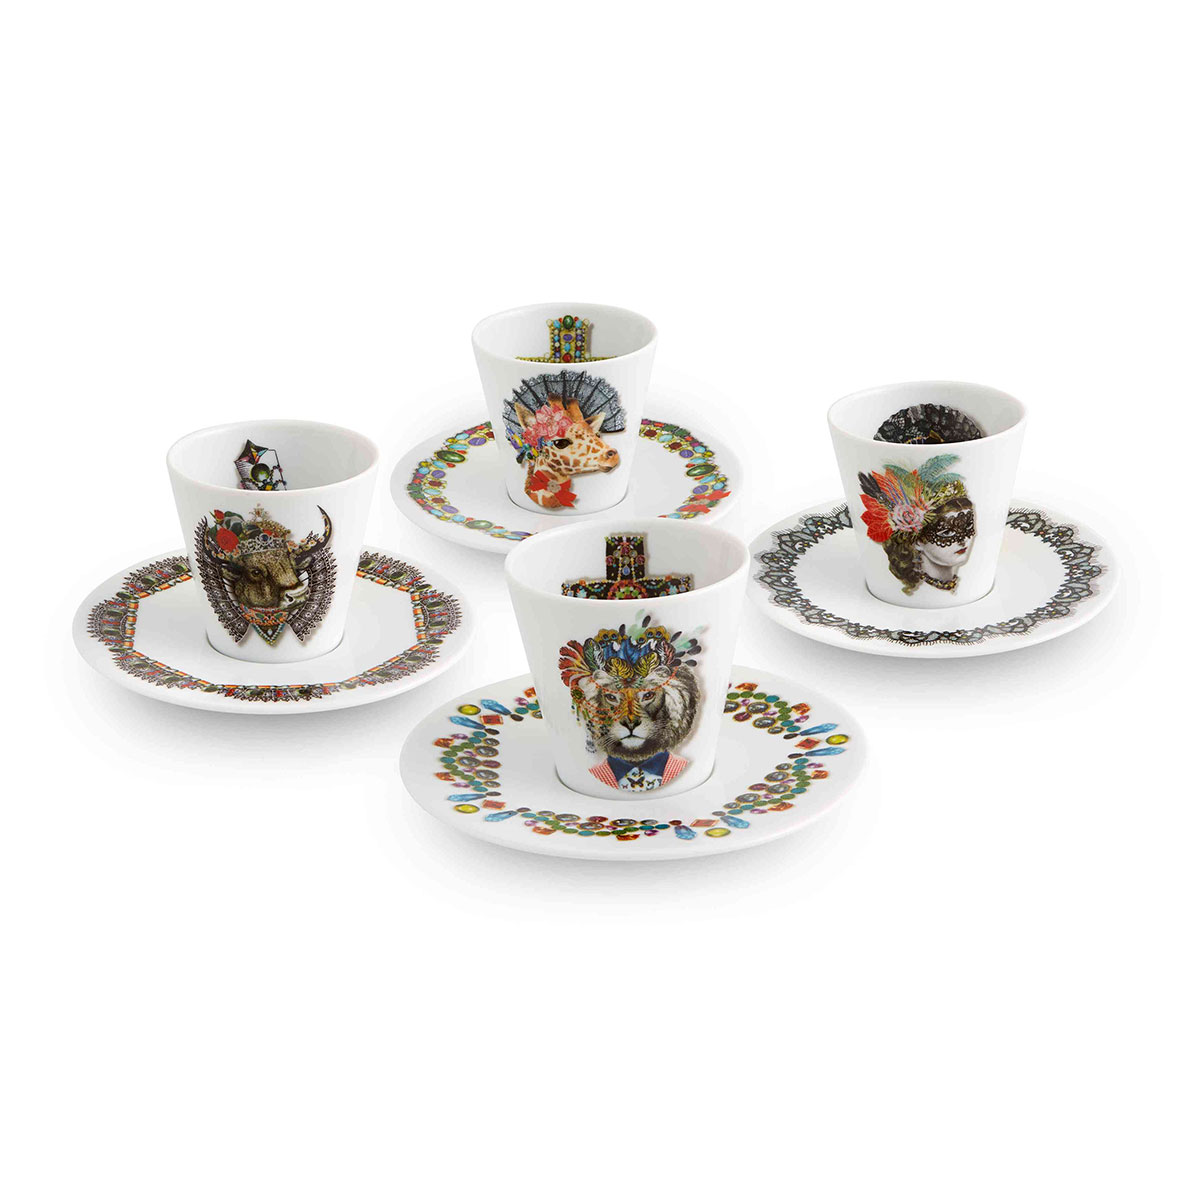 Vista Alegre Porcelain Christian Lacroix - Love Who You Want Set of 4 Expresso Cups And Saucers